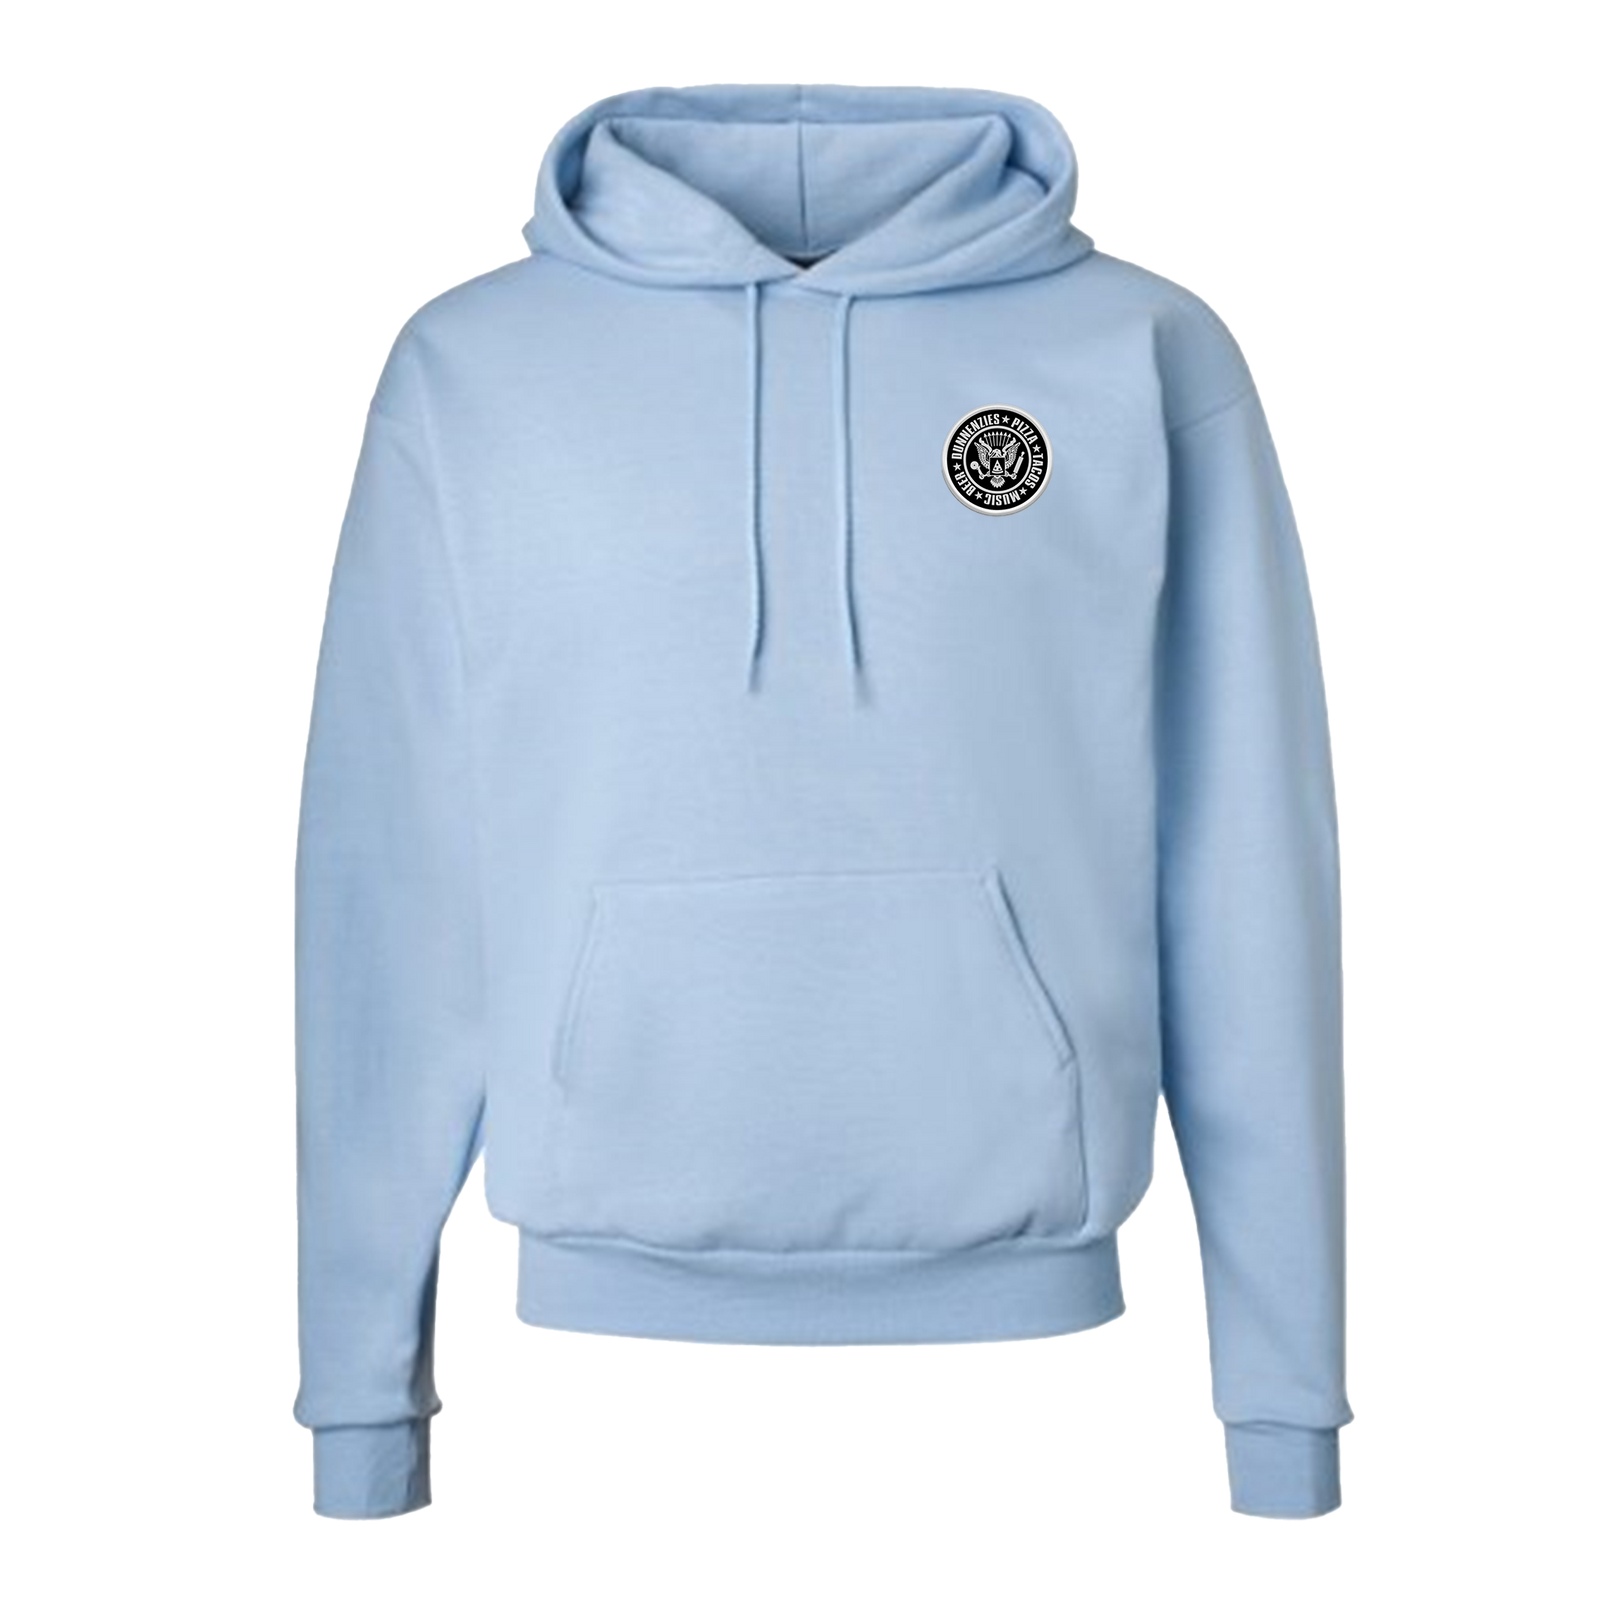 Dunnenzies Refelections Apparel Hoodie - Unisex Sizing XS-4XL - Powder Blue